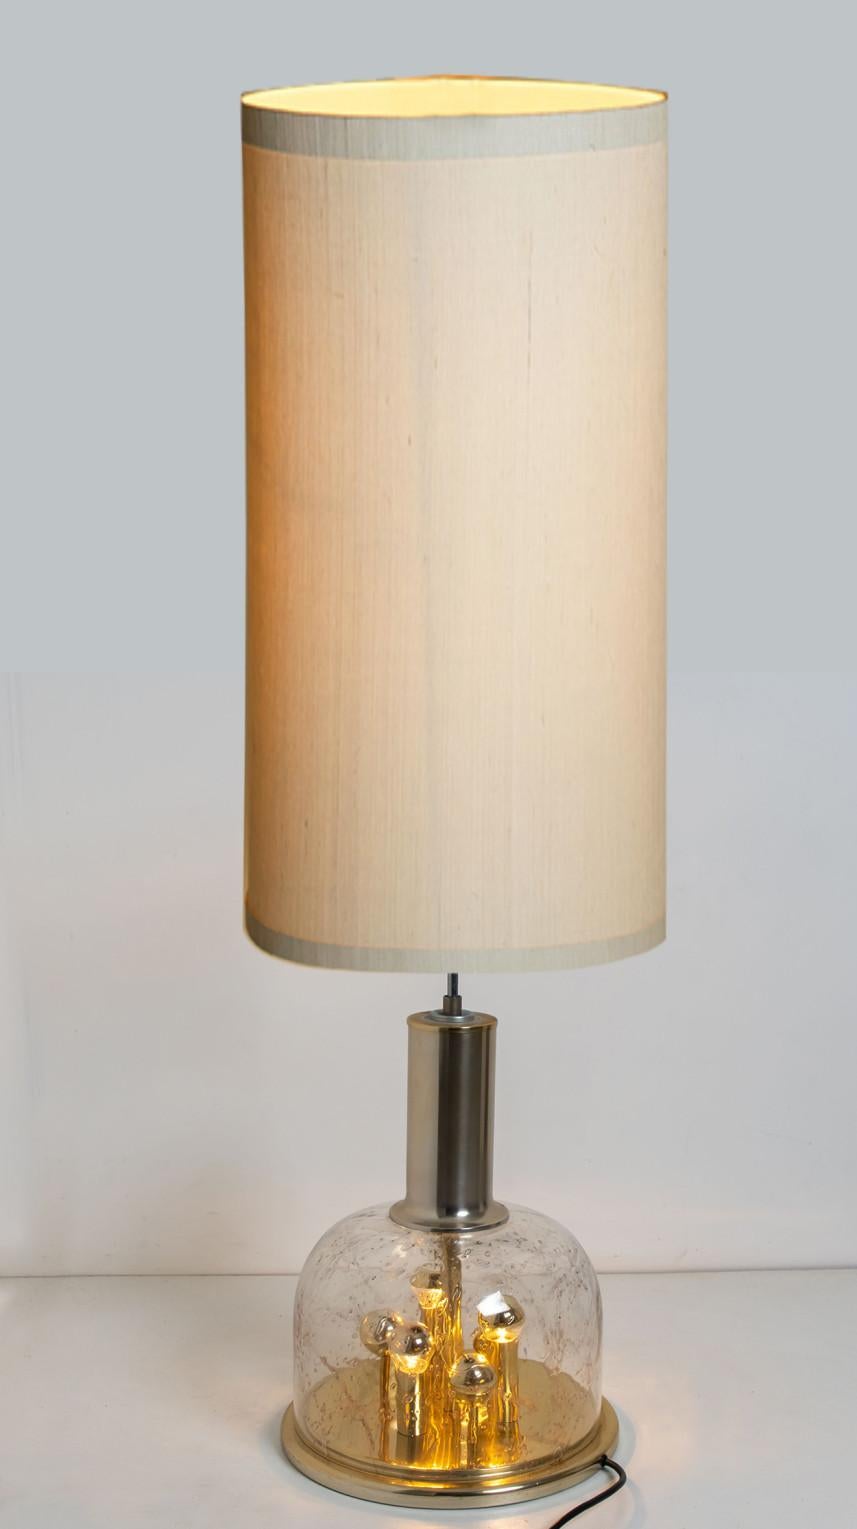 Hand Blown Bubble Glass and Brass Table Lamp by Doria Leuchten, 1970 For Sale 3